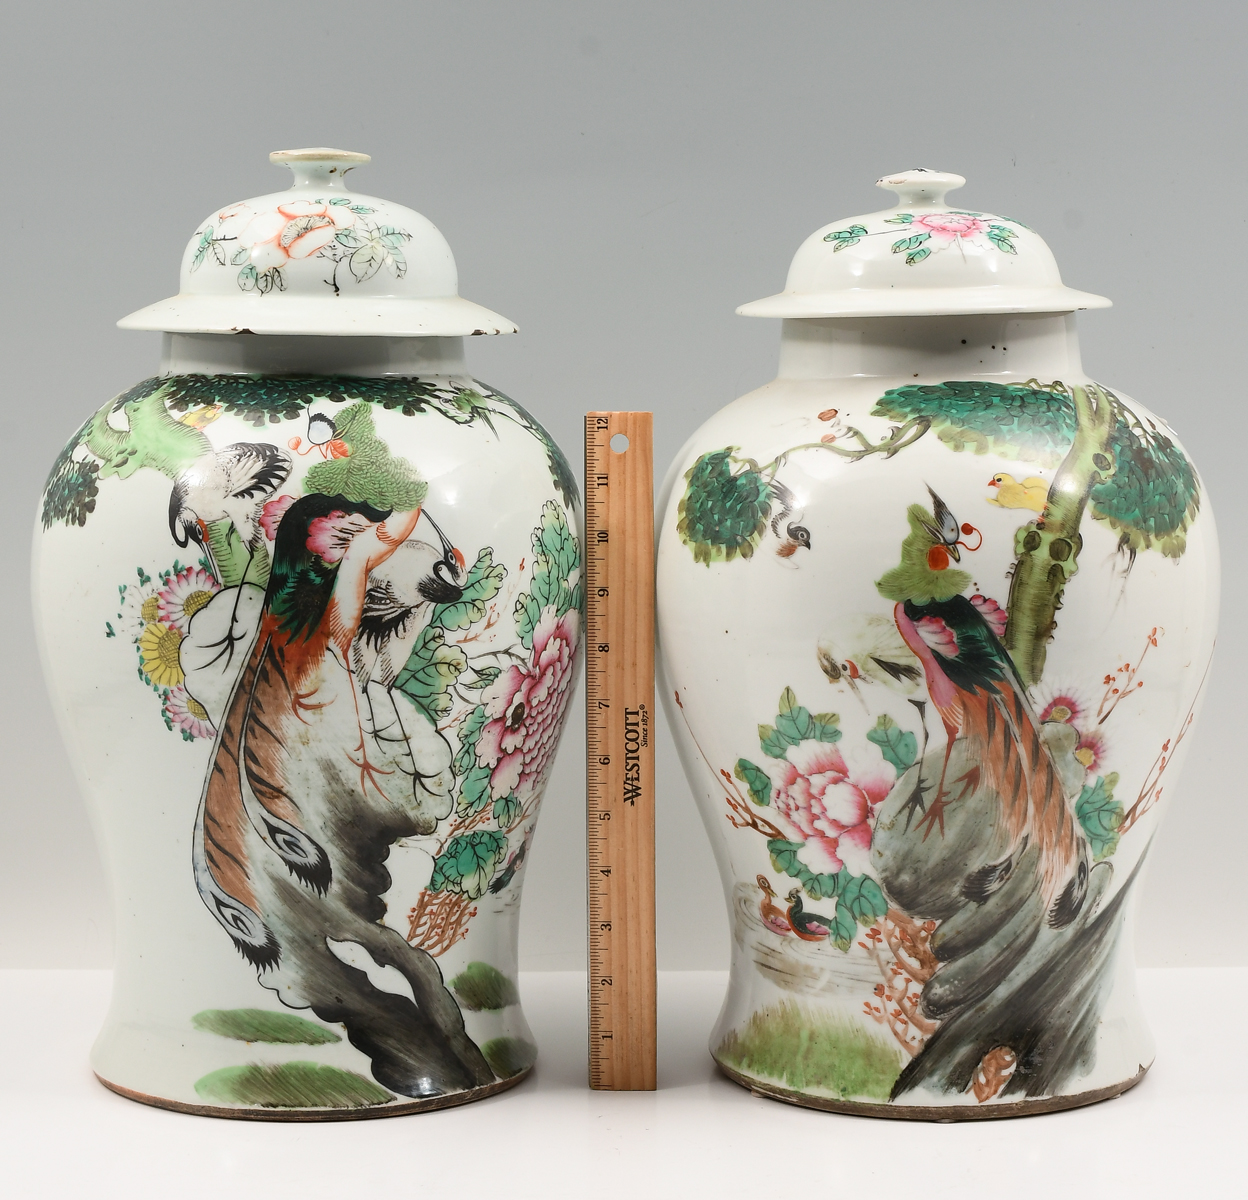 PAIR OF CHINESE QING DYNASTY BALUSTER